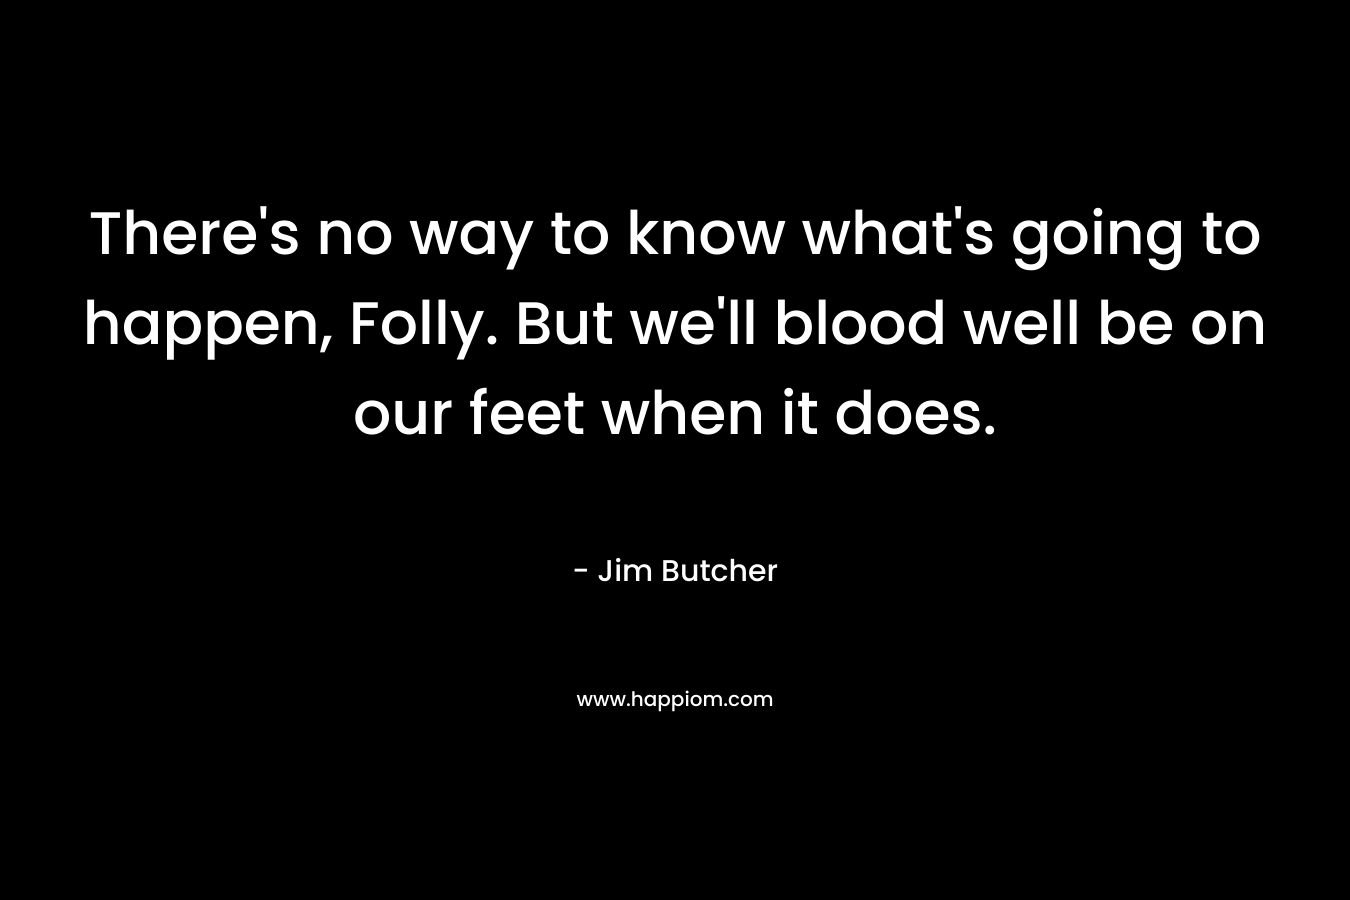 There's no way to know what's going to happen, Folly. But we'll blood well be on our feet when it does.